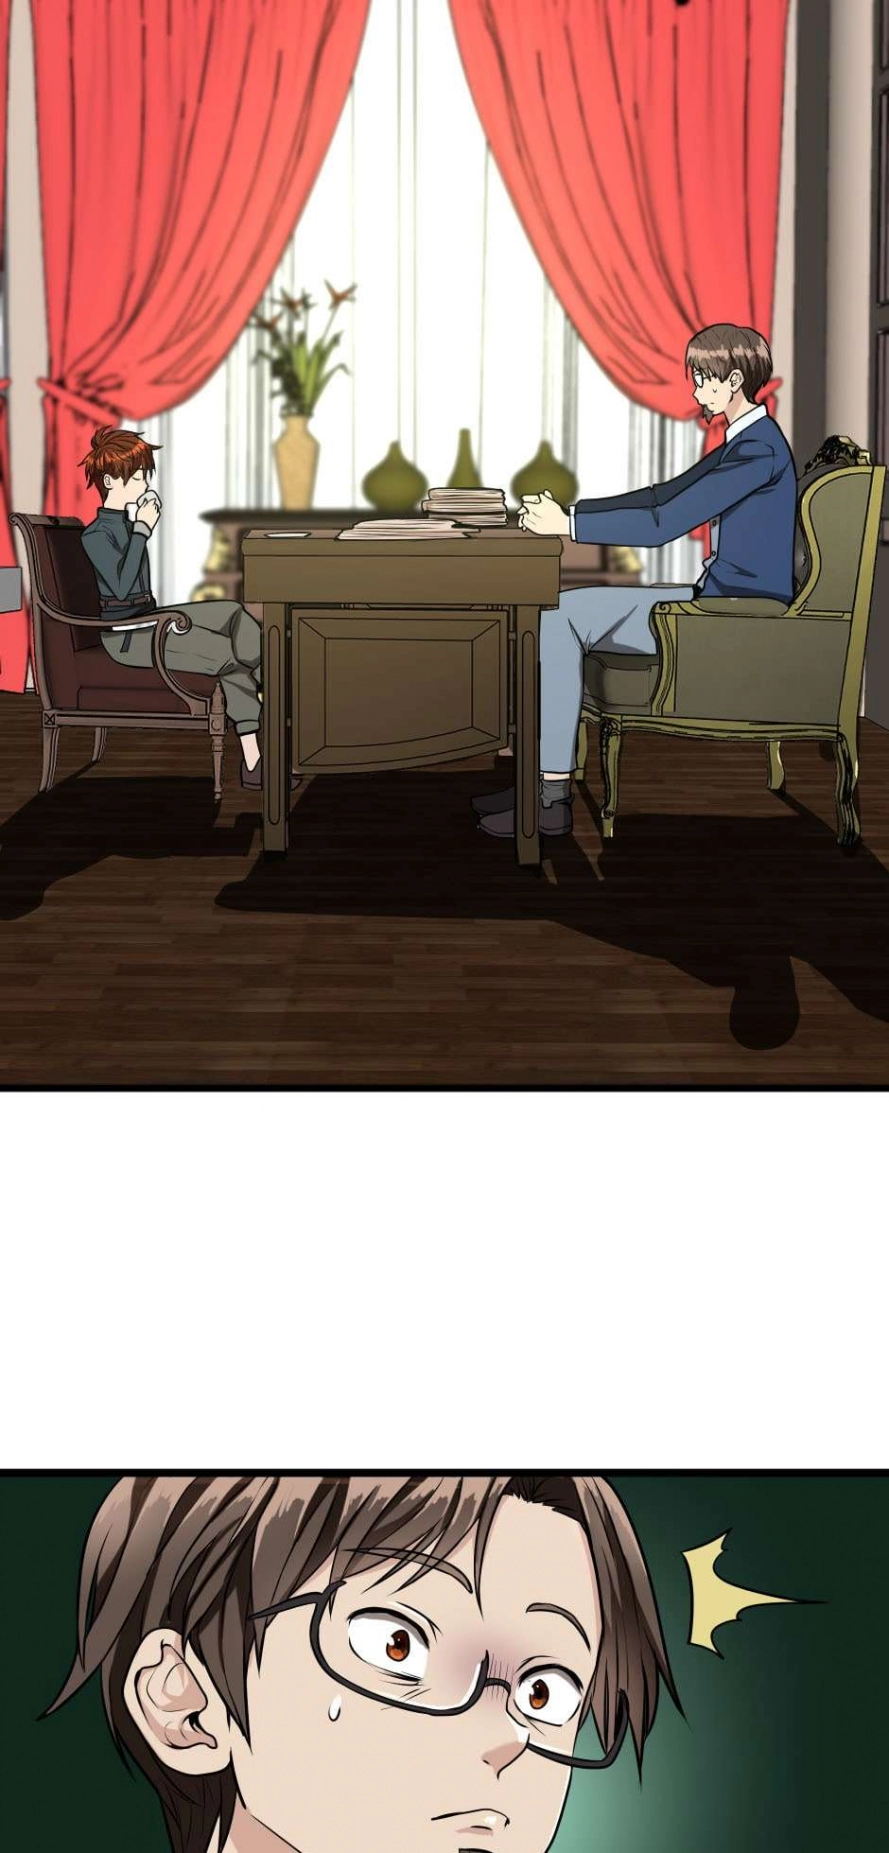 image of episode